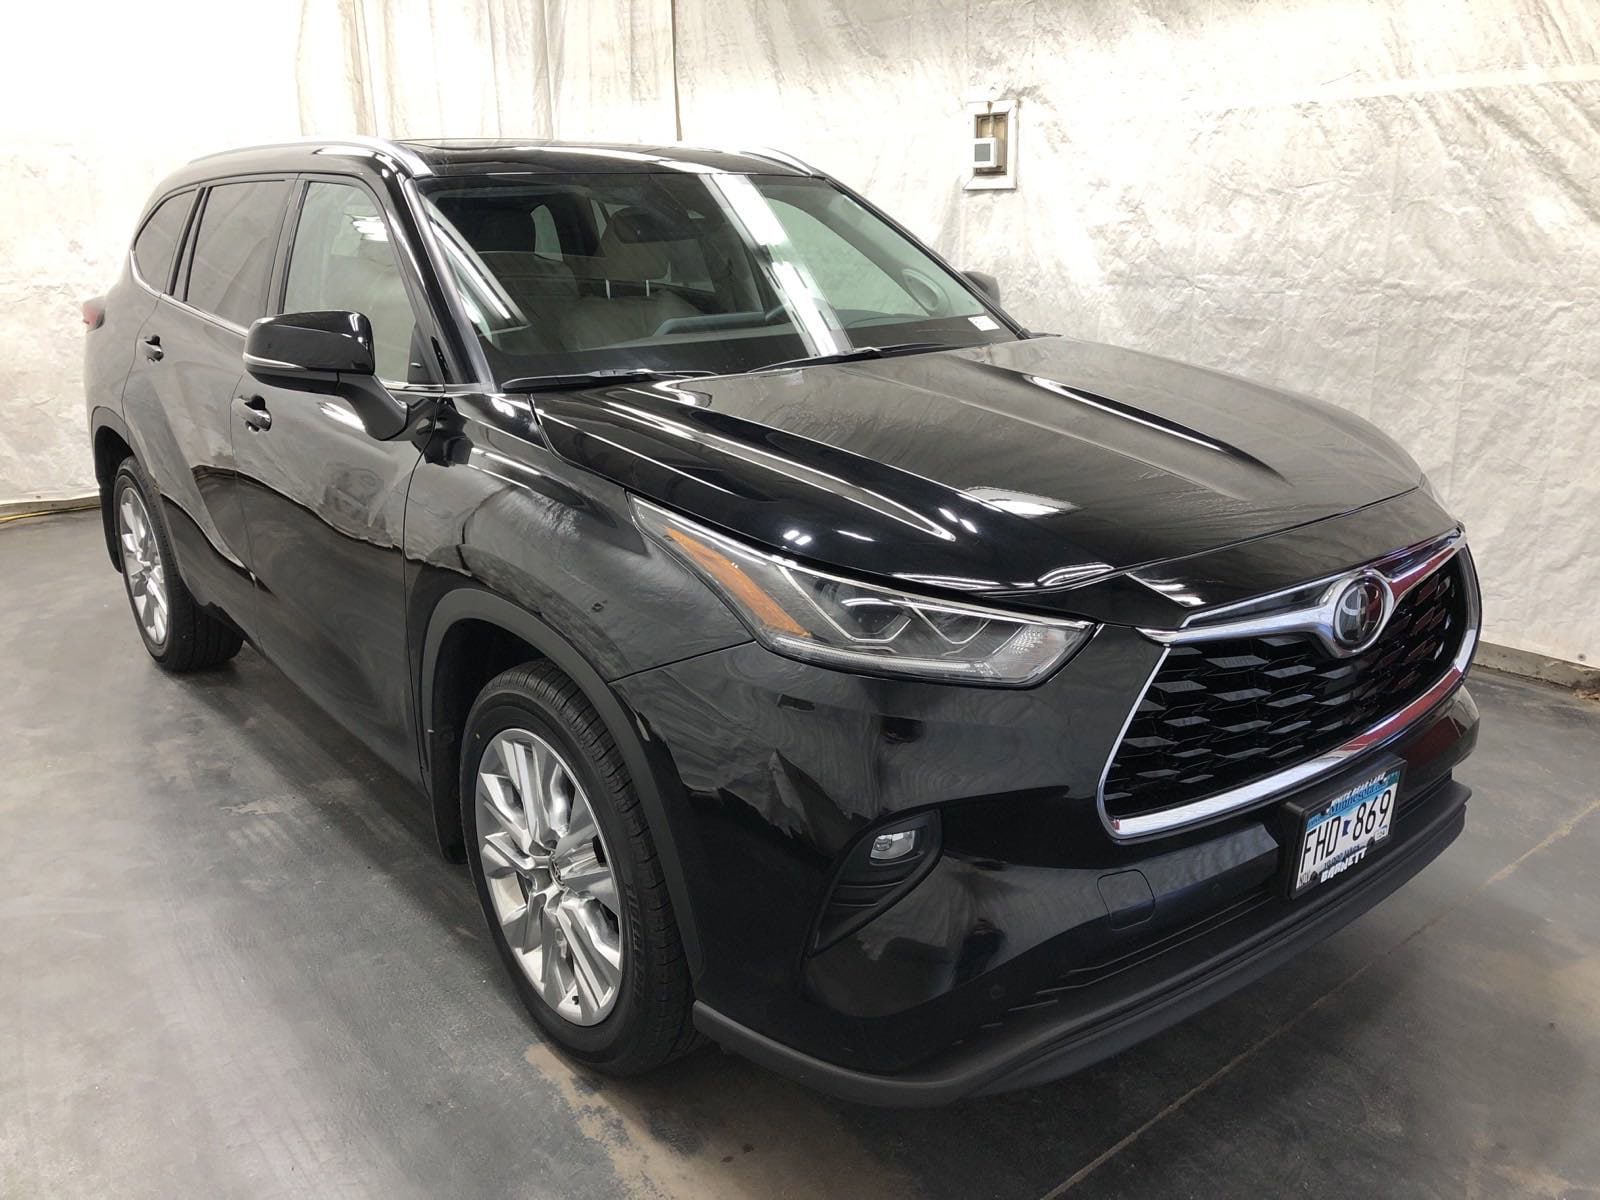 Used 2020 Toyota Highlander Limited with VIN 5TDDZRBH9LS035569 for sale in White Bear Lake, Minnesota